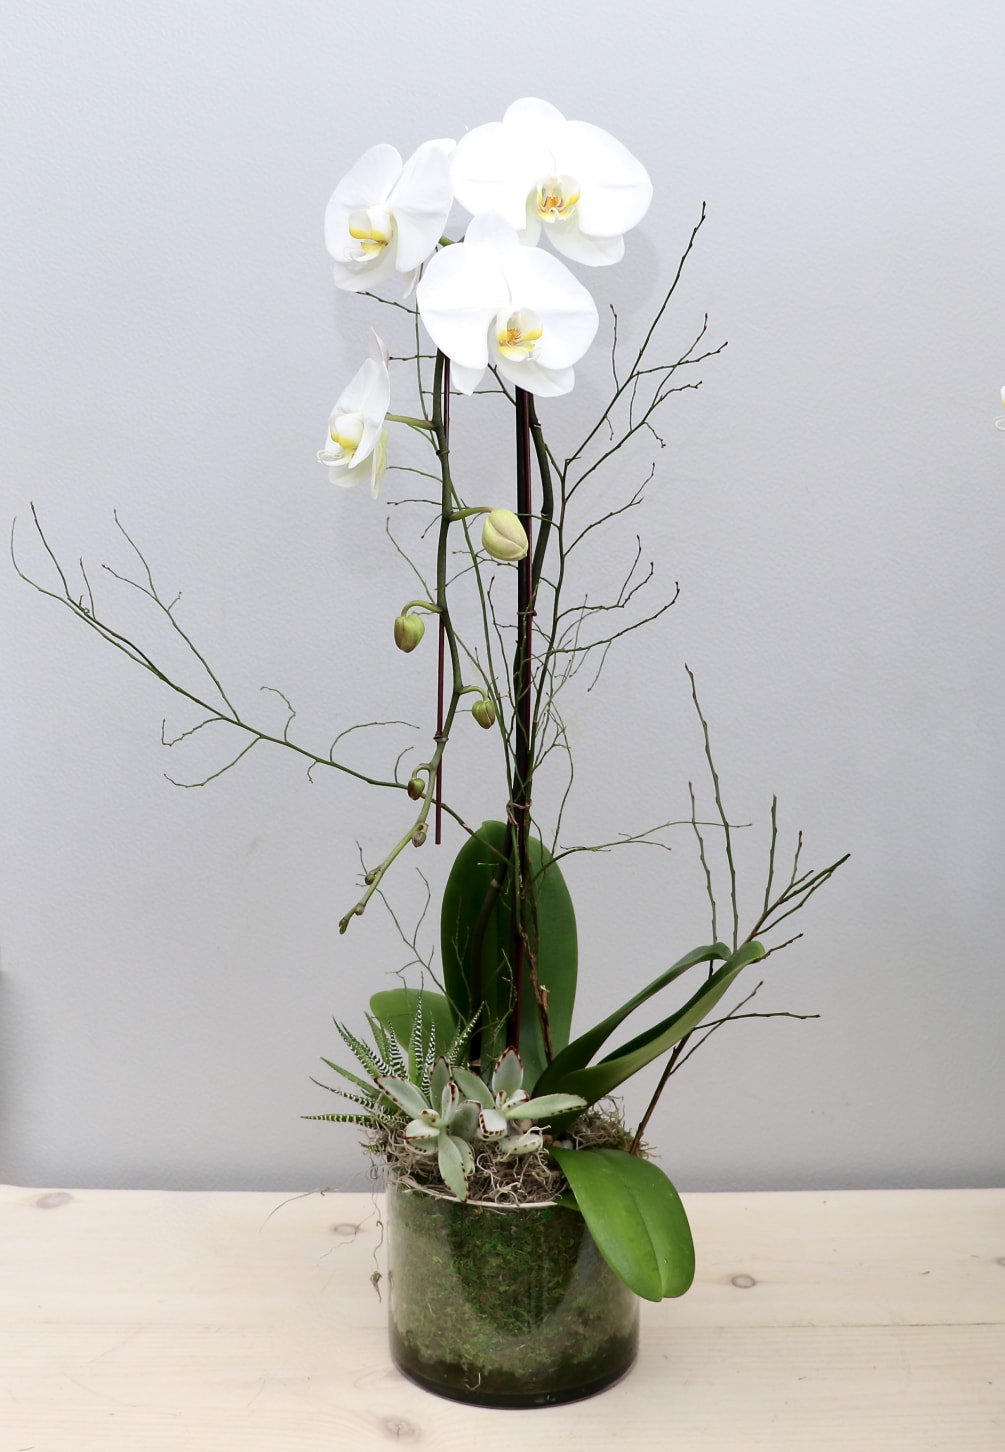 Glendale Florist presents a white orchid plant. This simple and elegant design